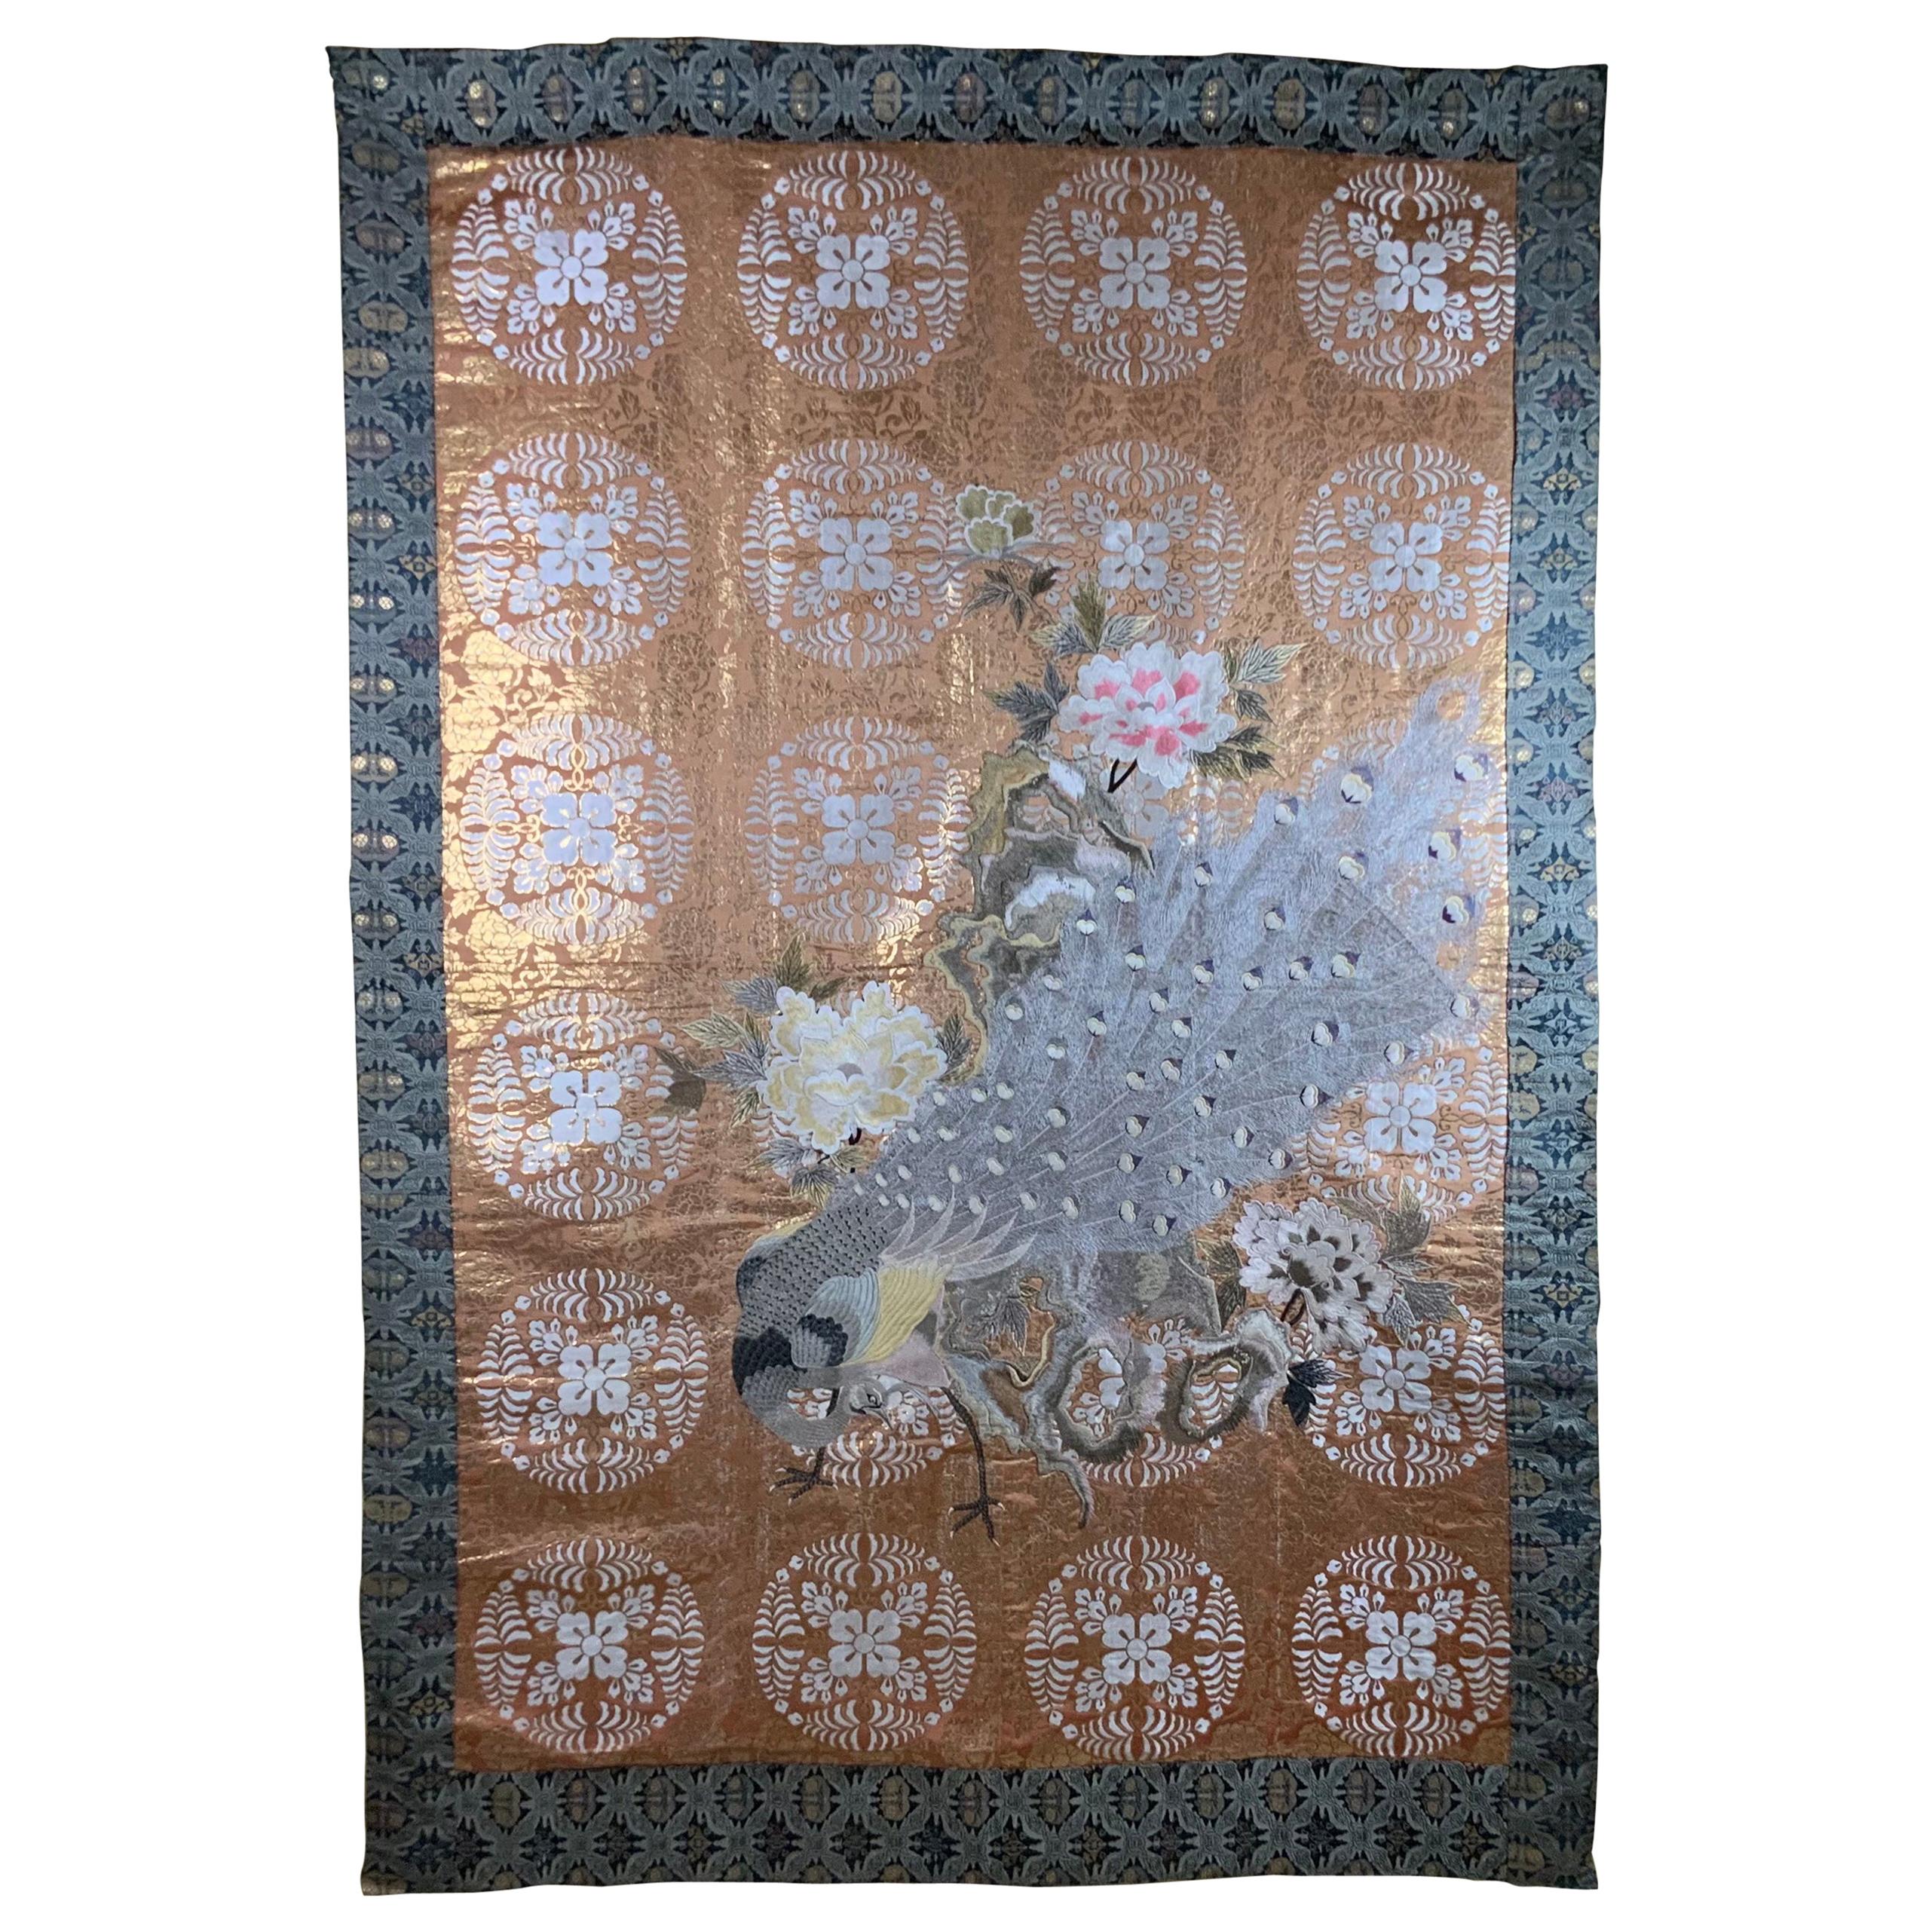 Large Vintage Chinese Hand Embroidery Tapestry